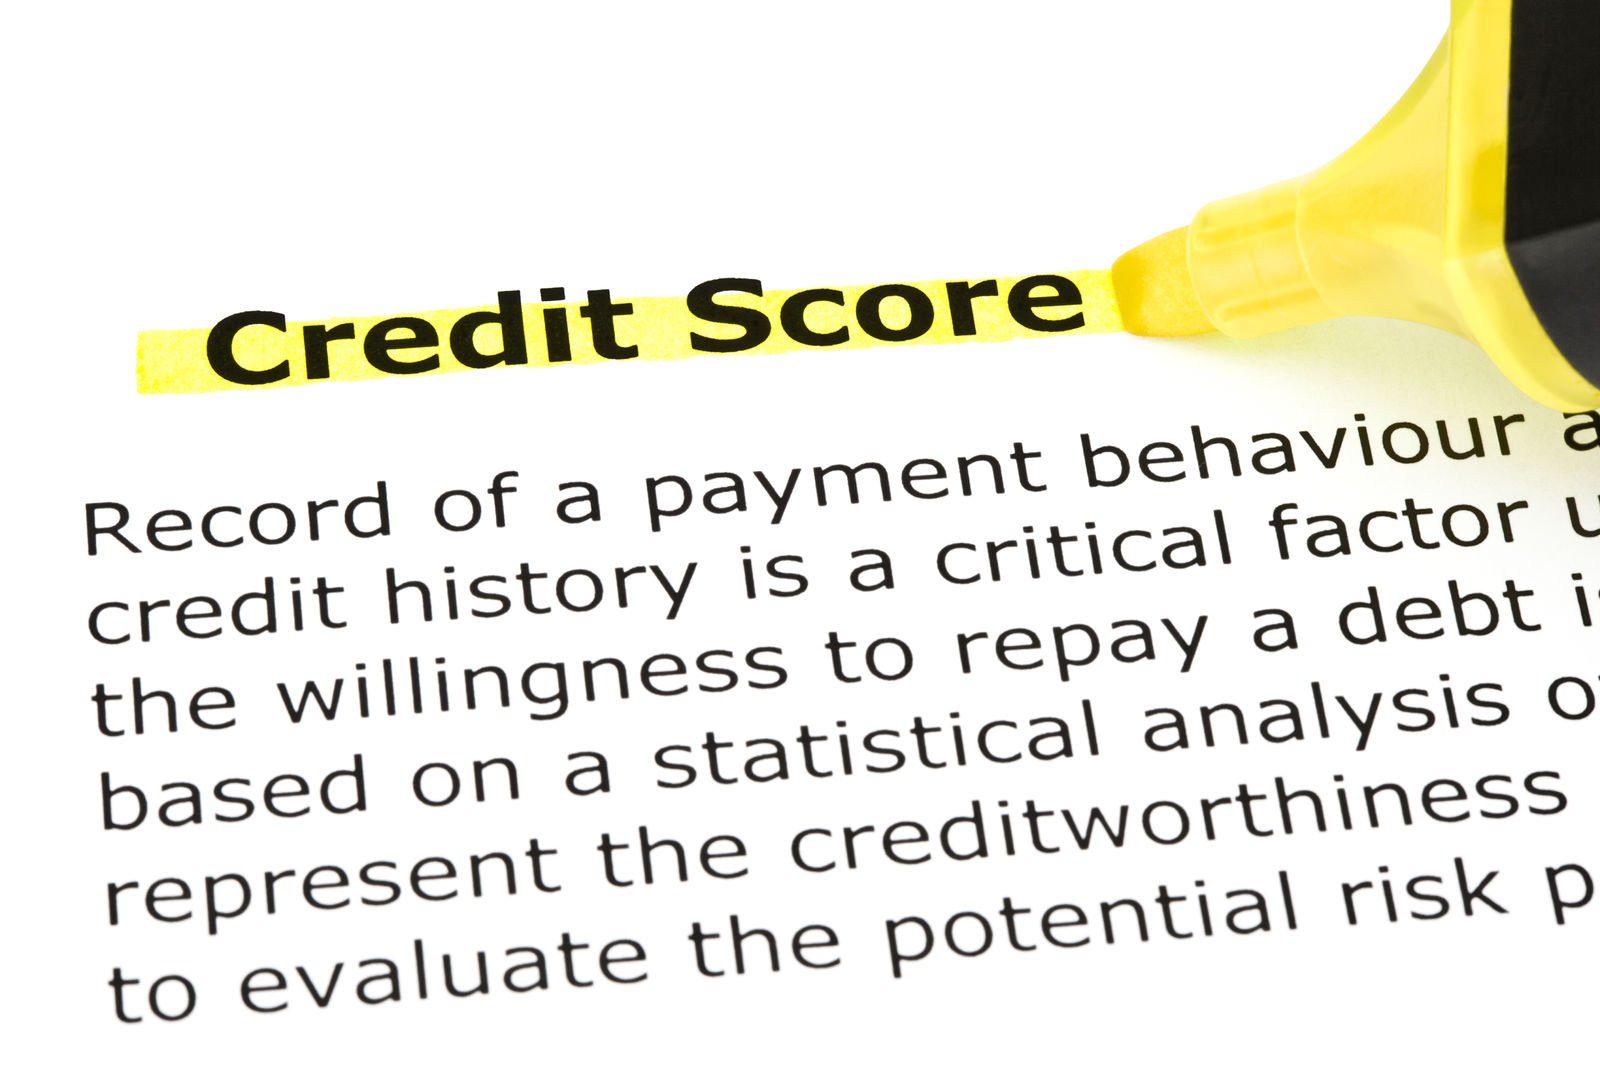 Do car insurance payments help credit?